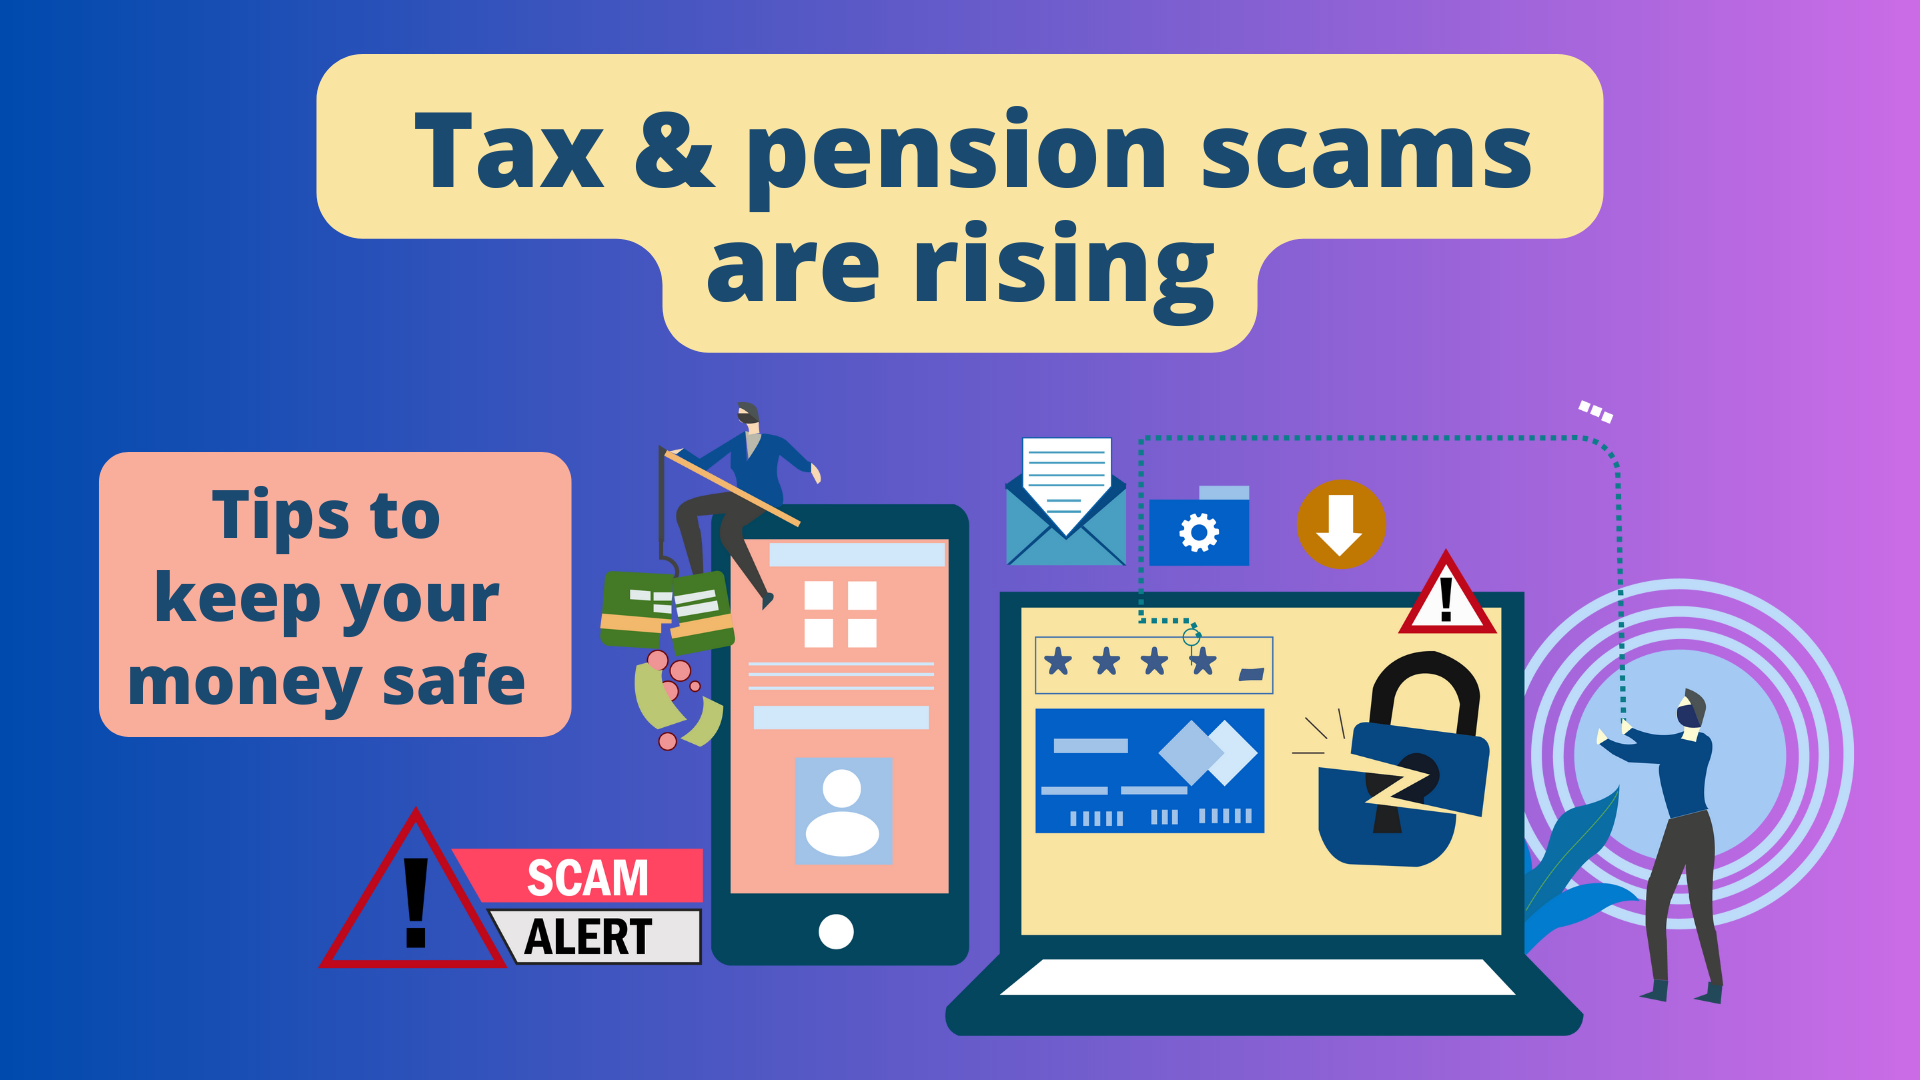 Avoid tax and pension scams